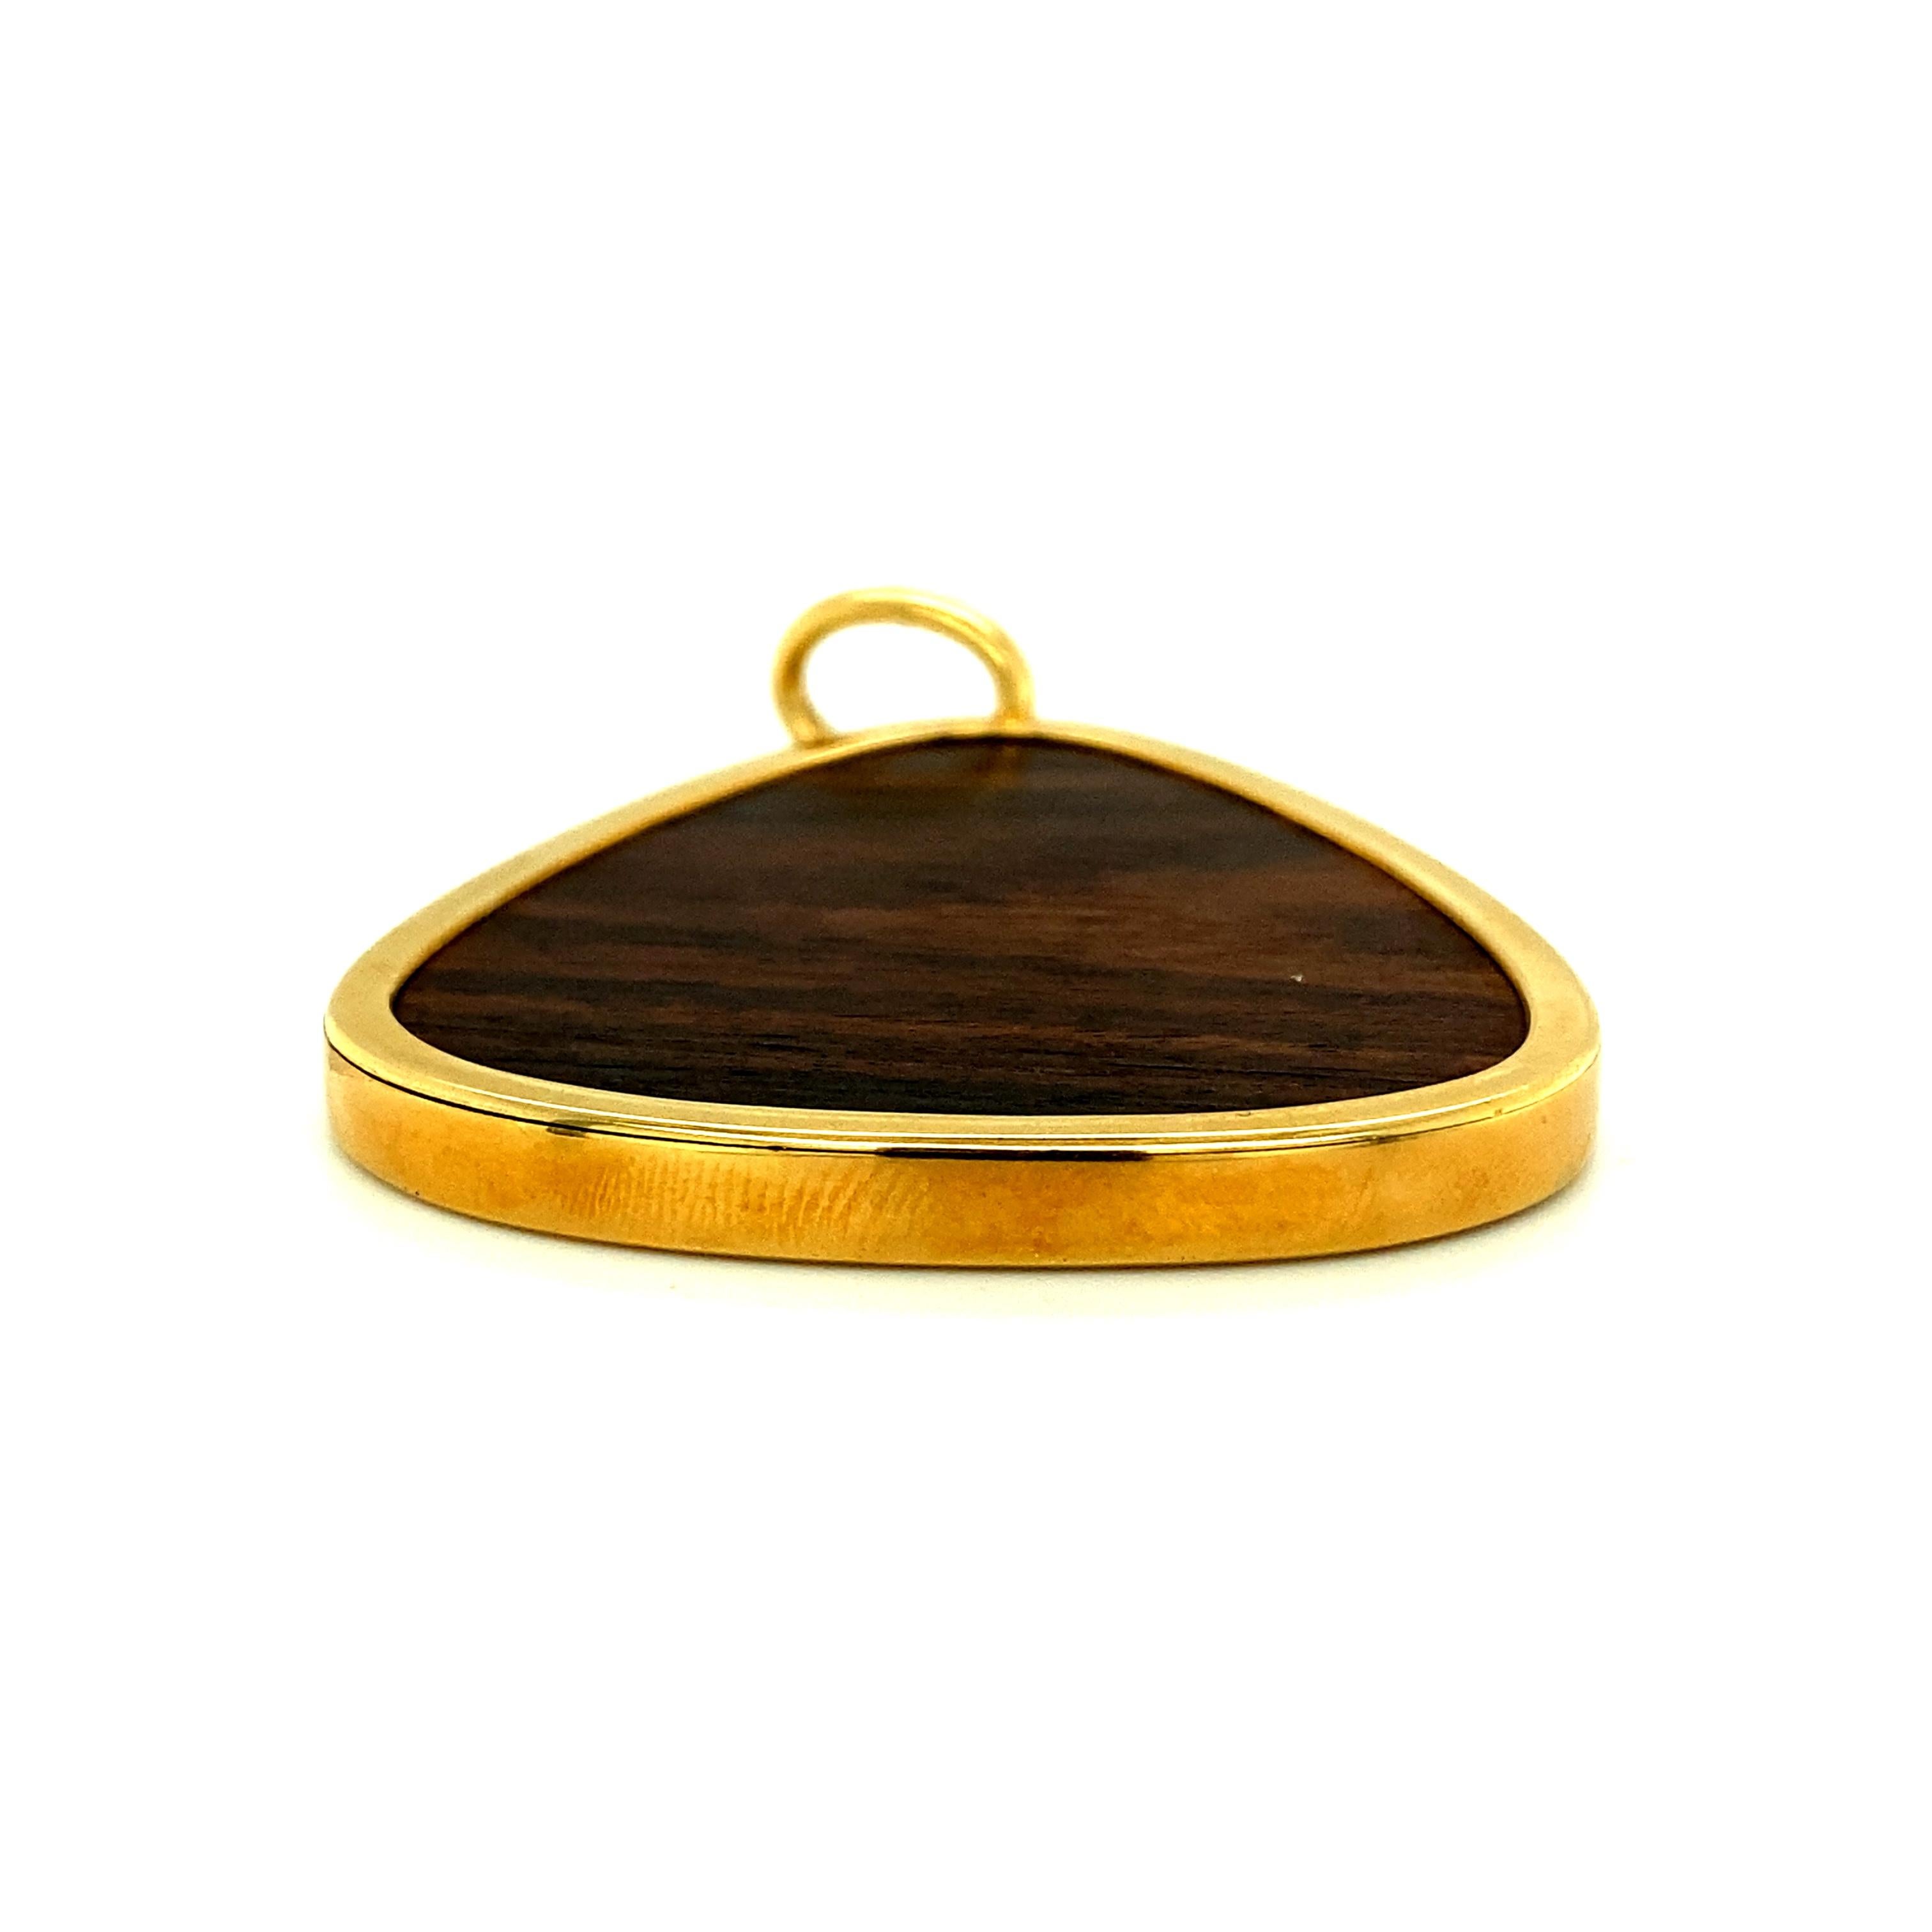 Cabochon Van Cleef & Arpels Large Pendant Tigers Eye in 18k Yellow Gold